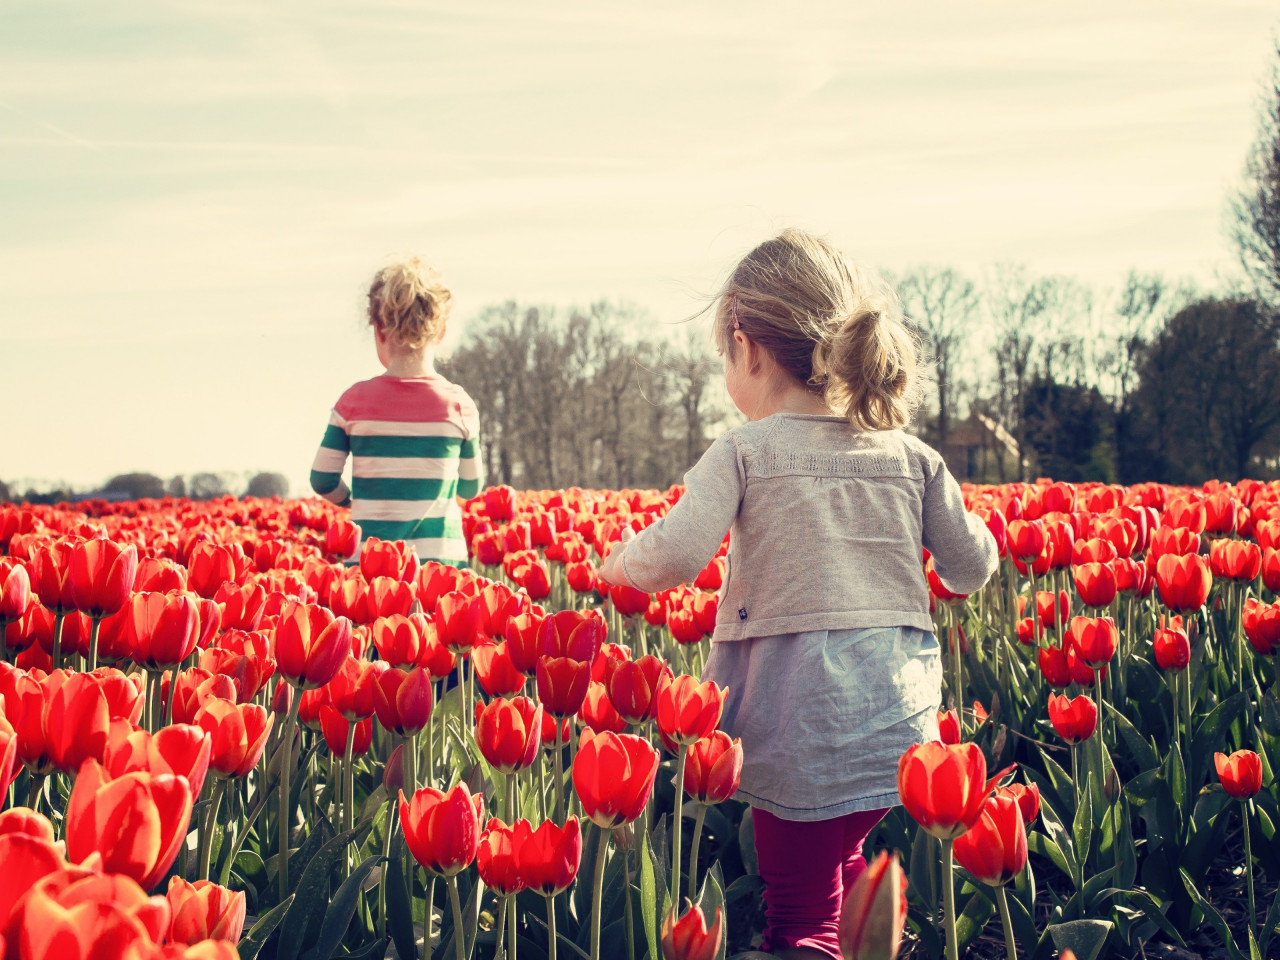 Children in the land with tulips wallpaper 1280x960